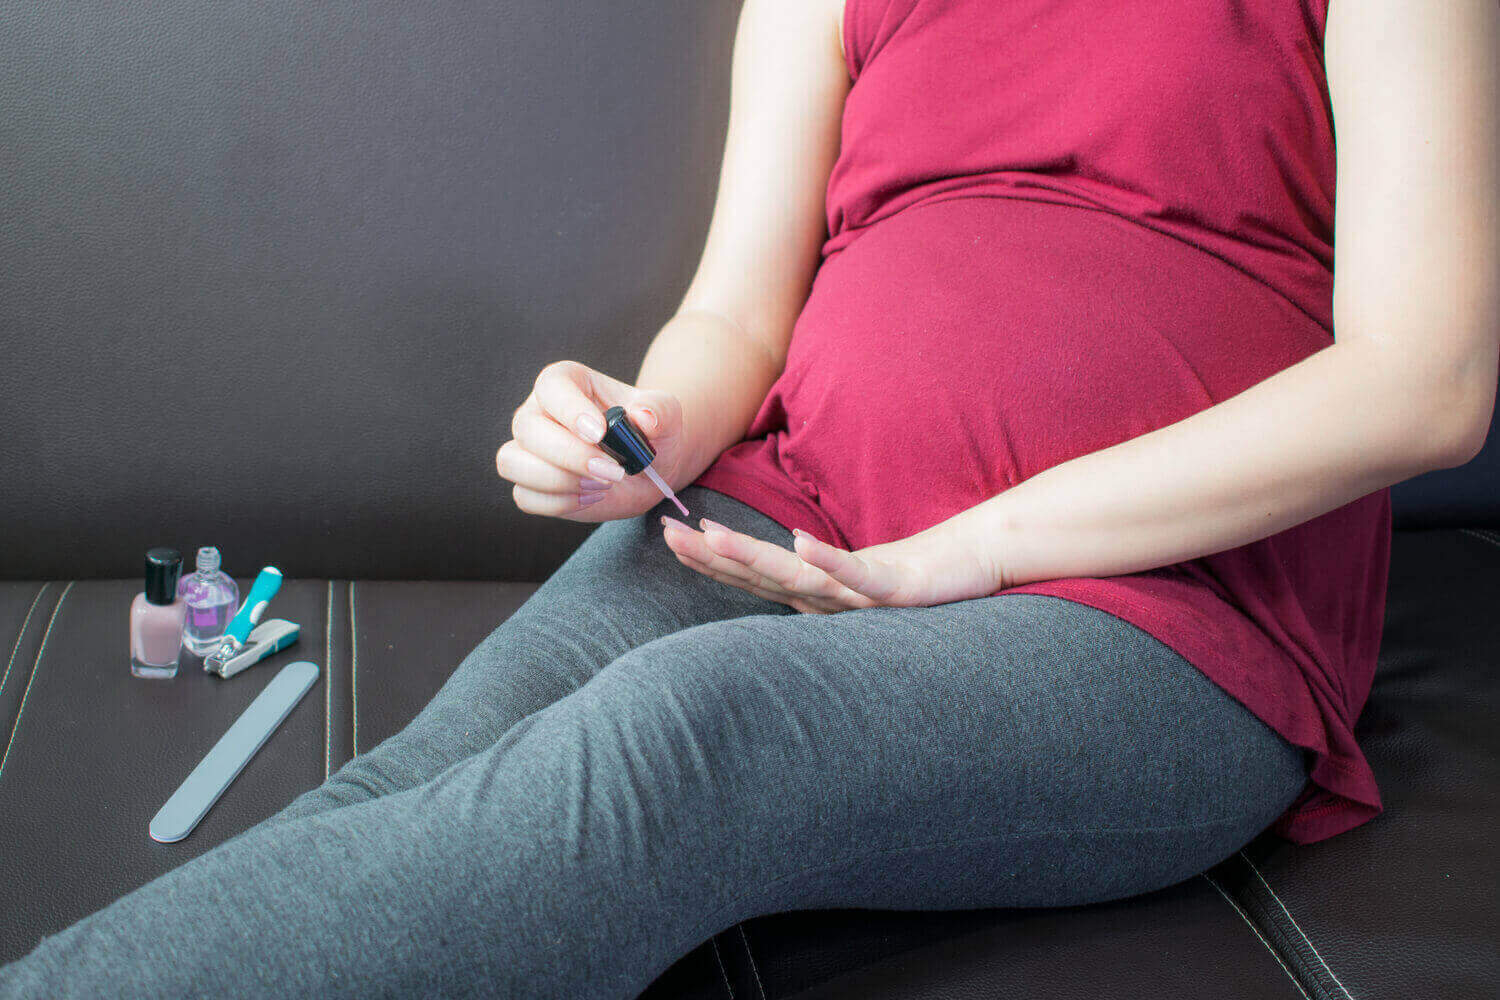 Manicure And Pedicure During Pregnancy – Are They Safe?